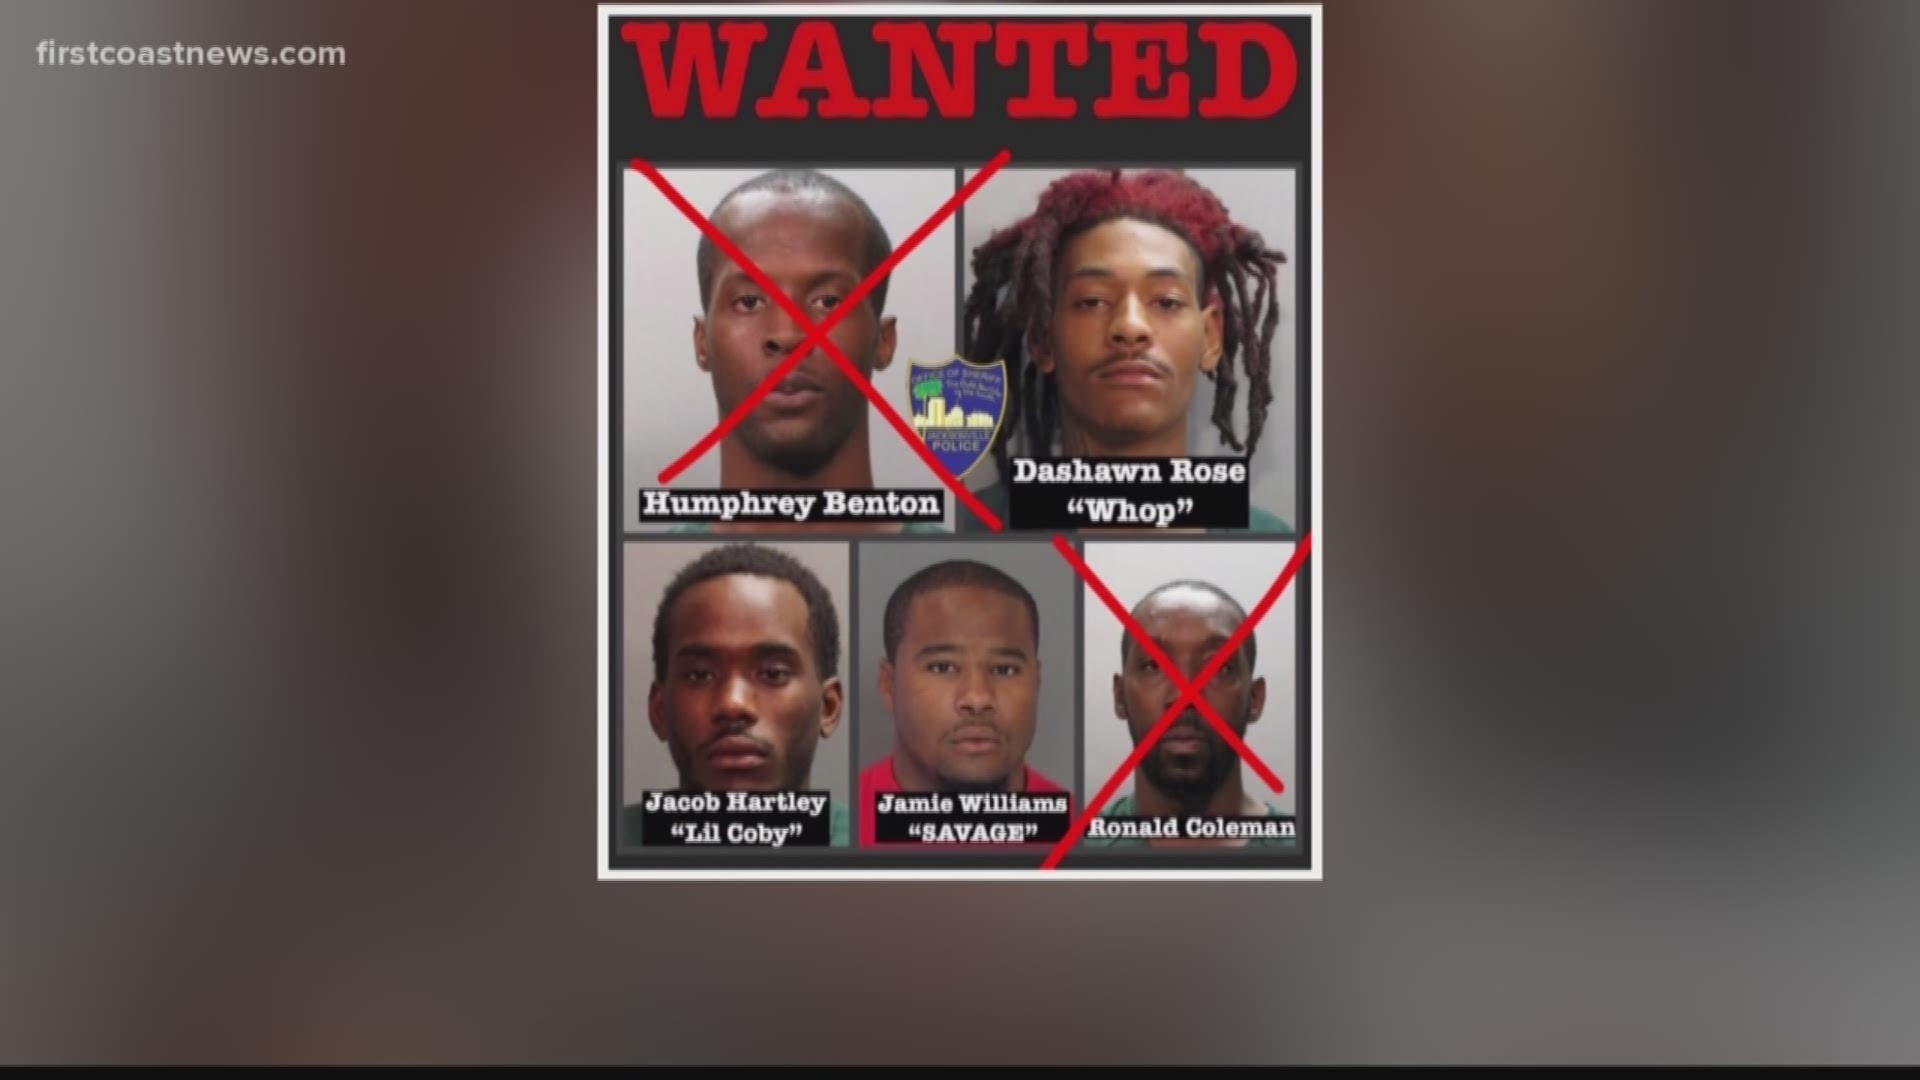 A total of 43 suspected Rollin' 20s gang members are now arrested after two turned themselves in to police, the Jacksonville Sheriff's Office said Wednesday.